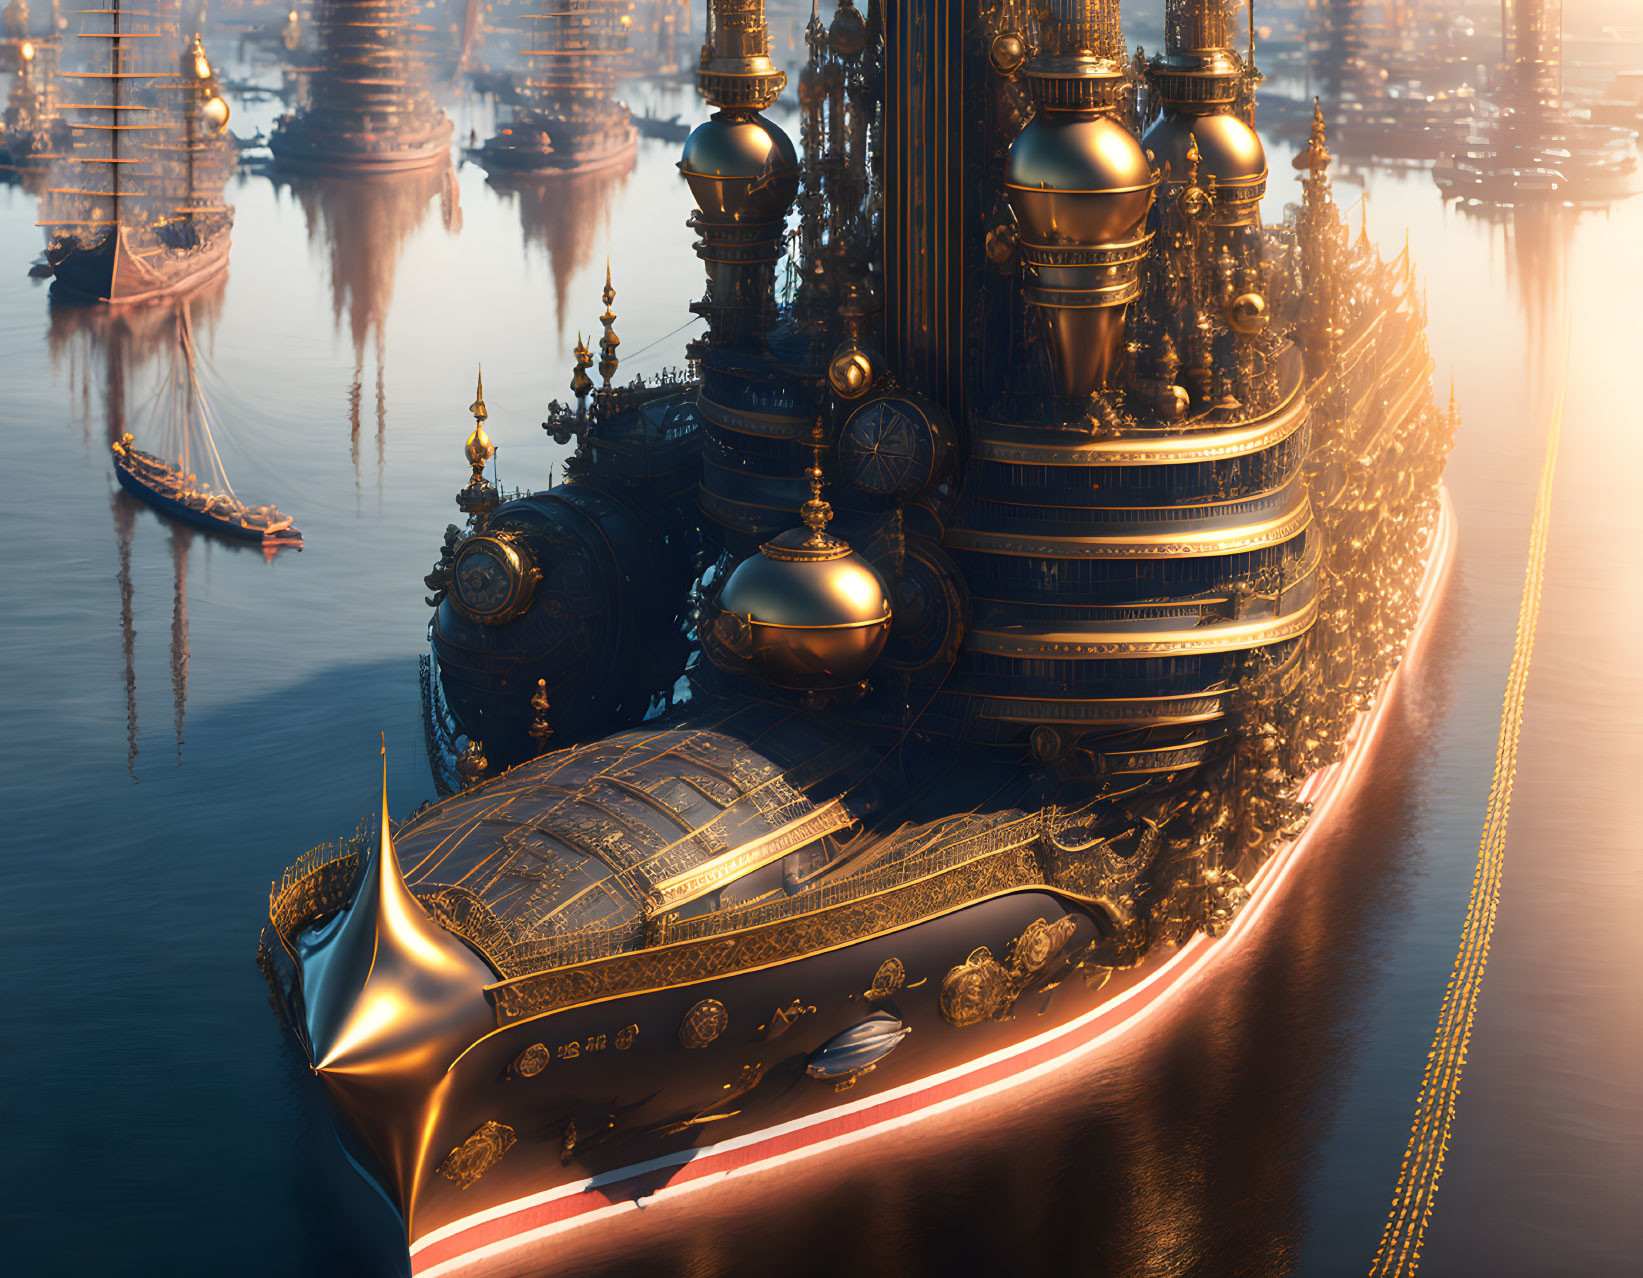 Golden futuristic cityscape floating over water with intricate architecture and sailing boats under soft sunlight